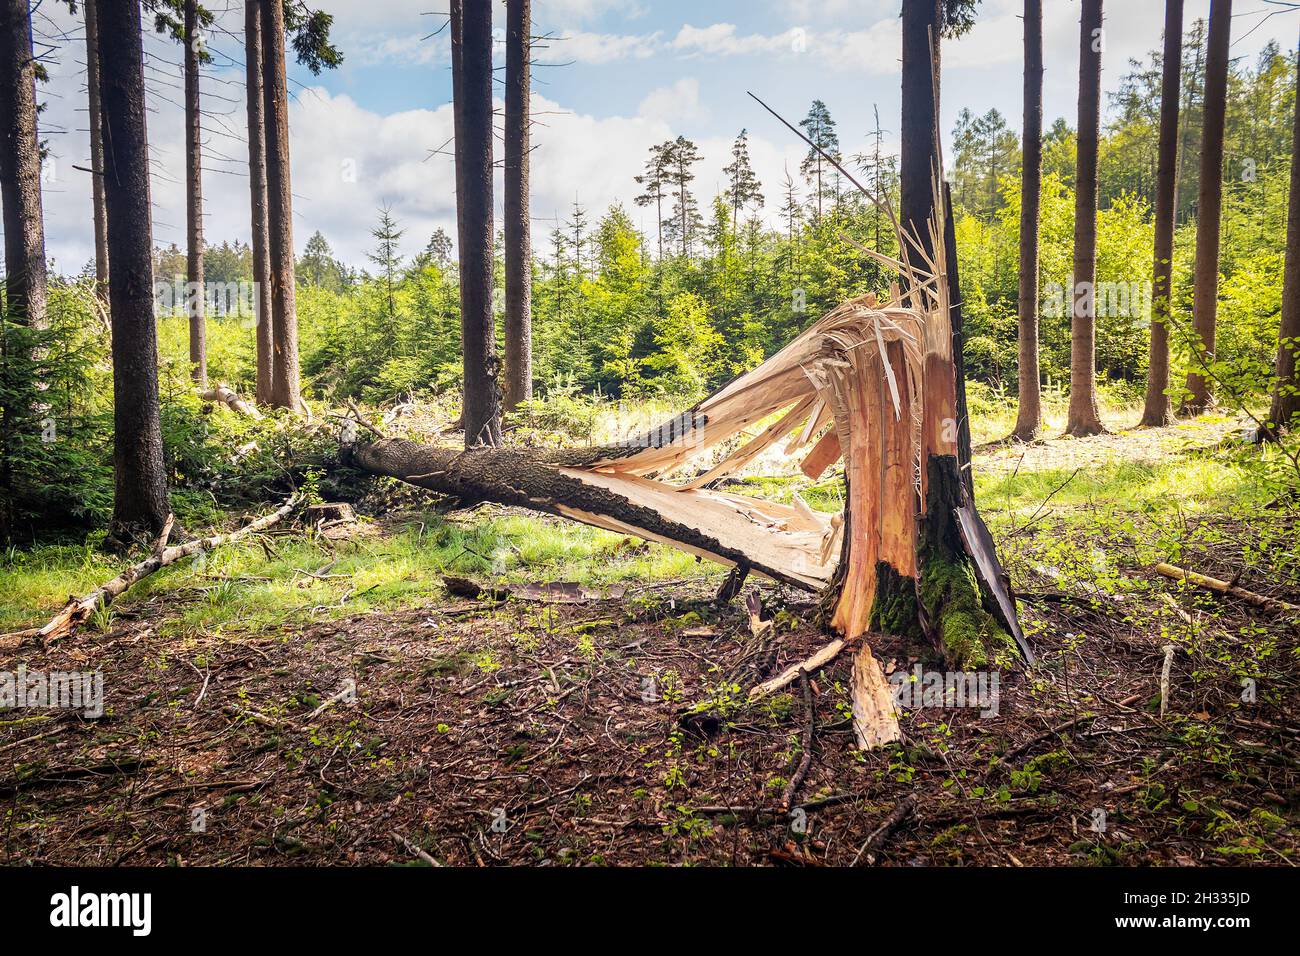 one tree trunk broken by strong winds and fallen to the ground Stock Photo